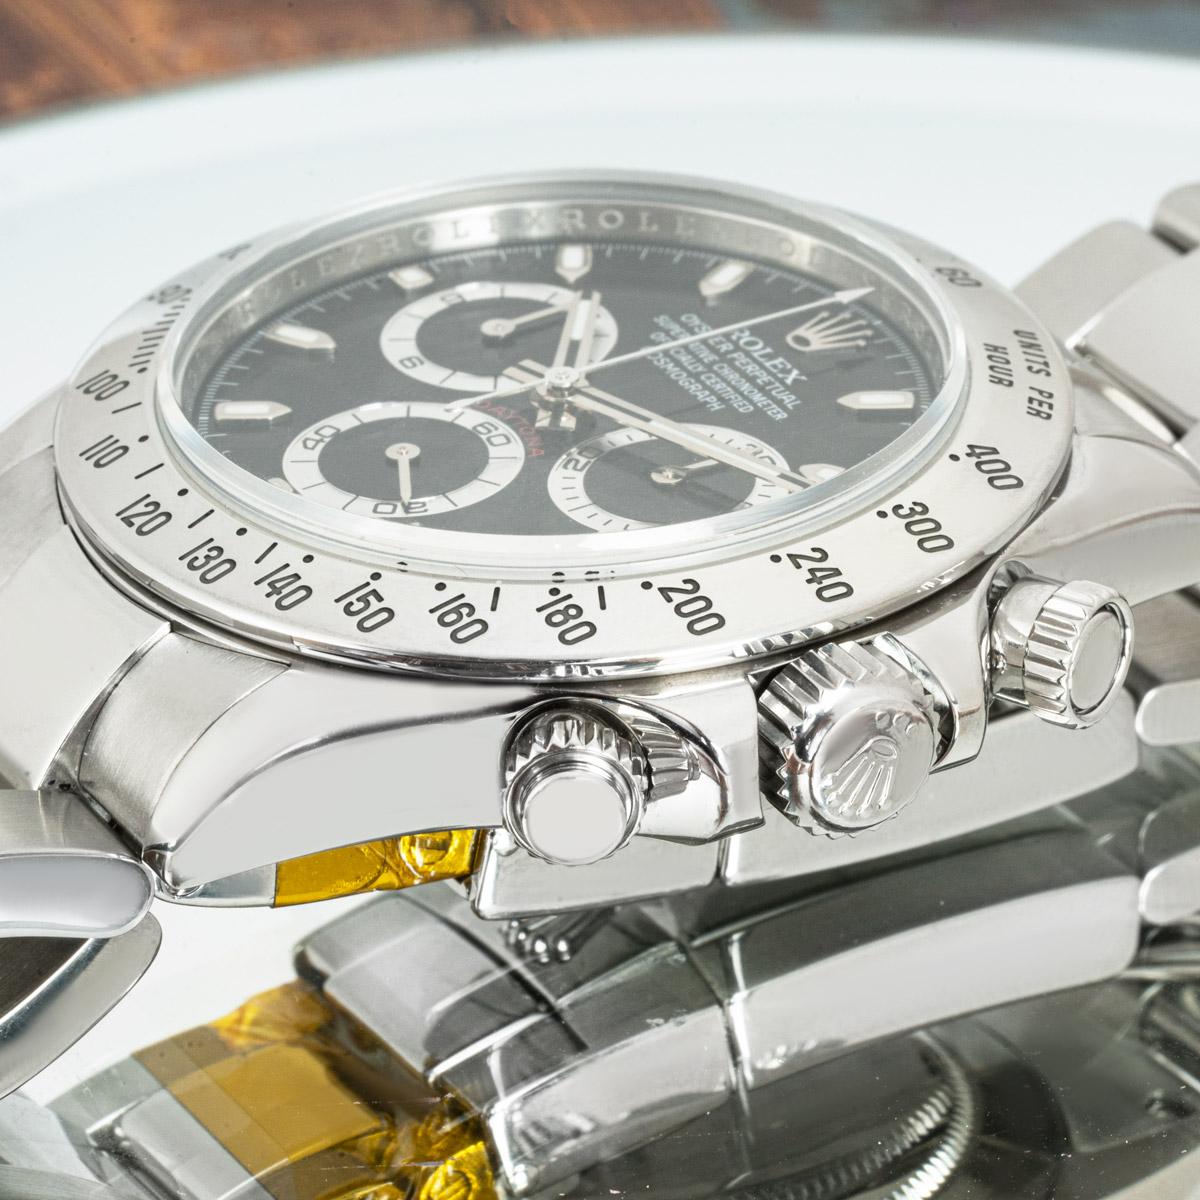 A stainless steel Cosmograph Daytona by Rolex. Featuring a black dial with an engraved tachymetric scale, three counters and pushers; the Daytona was designed to be the ultimate timing tool for endurance racing drivers.

The Oyster bracelet is